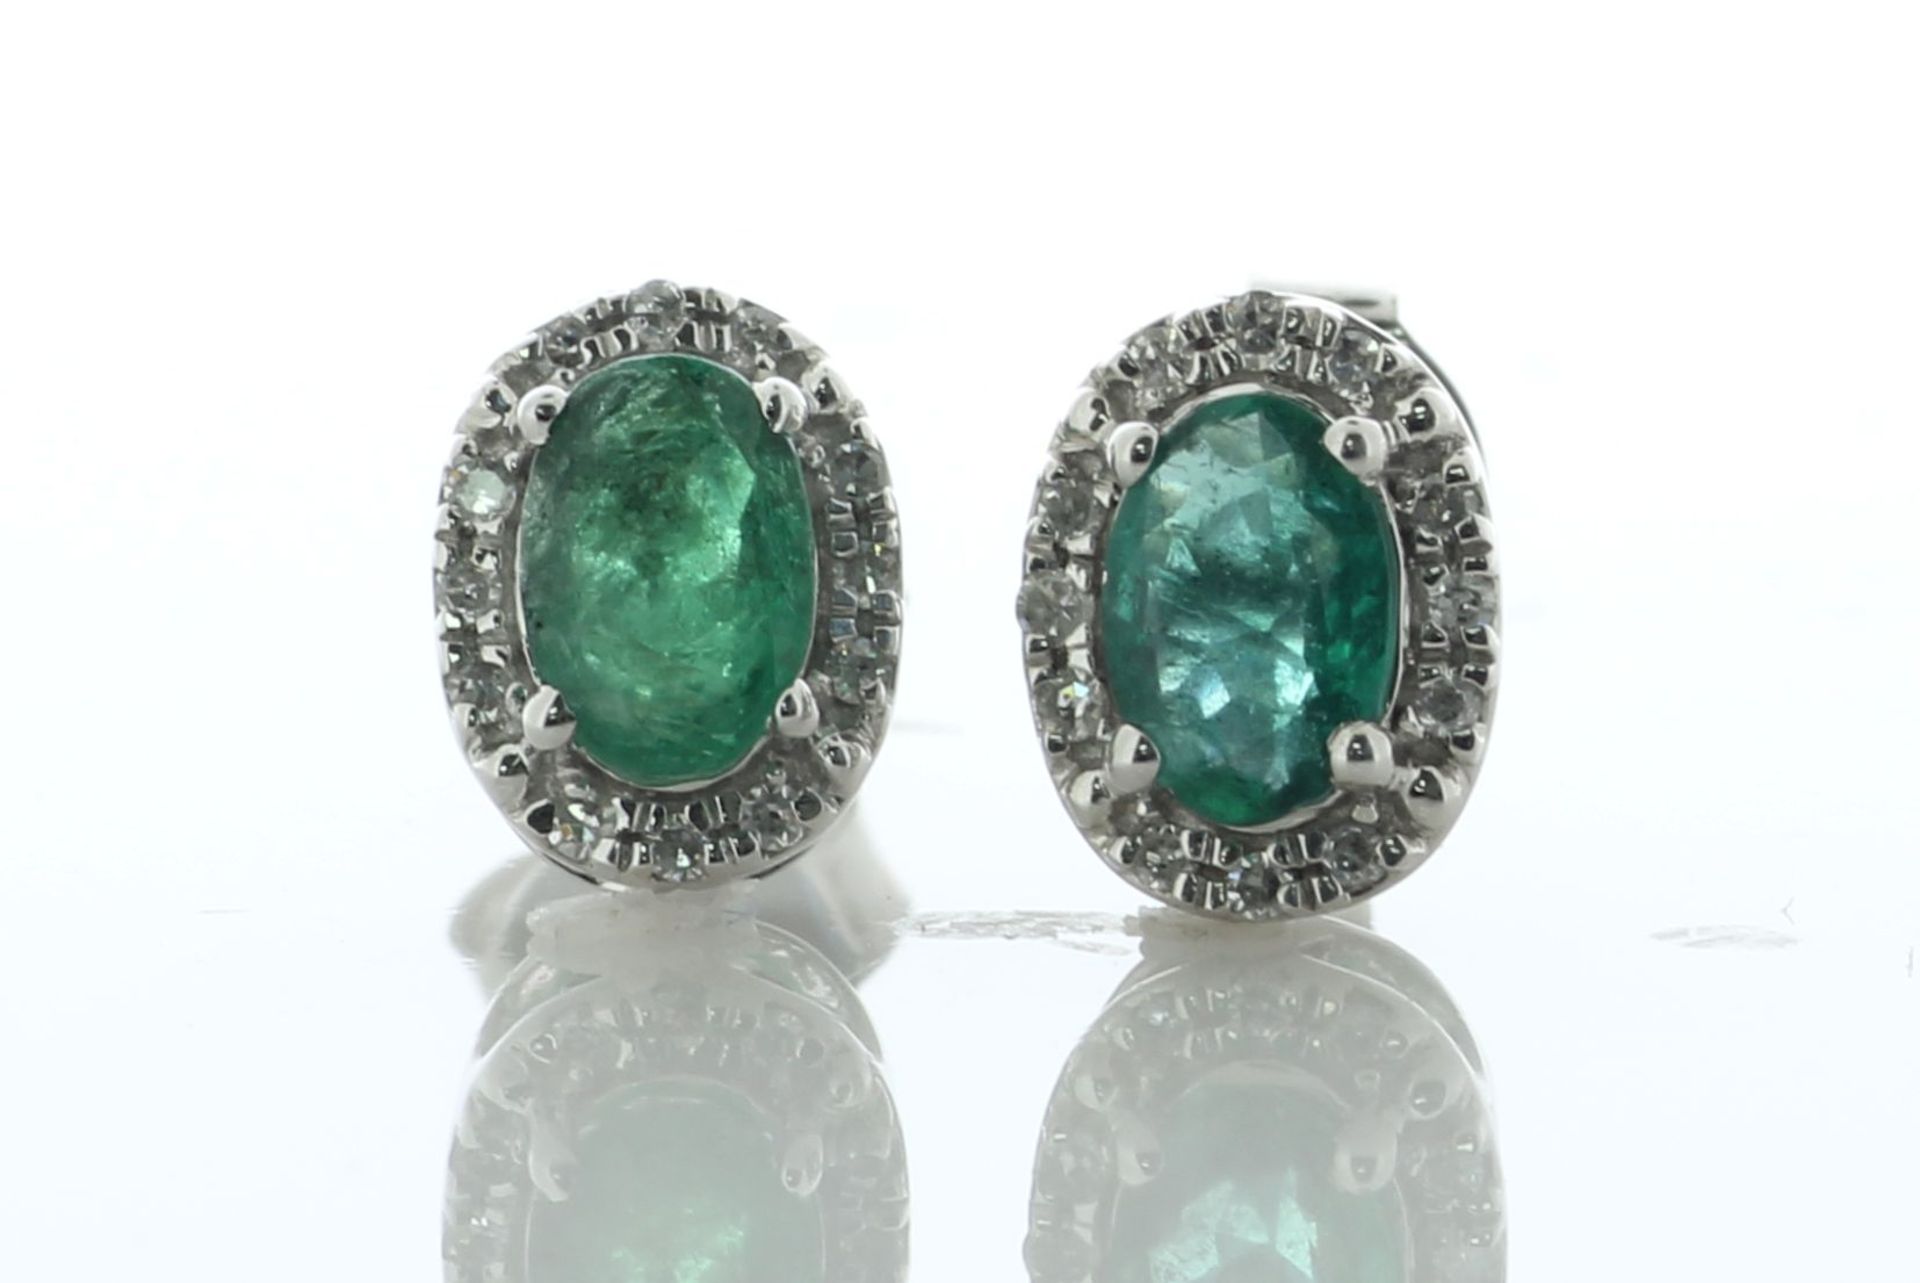 14ct White Gold Oval Cut Emerald And Diamond Stud Earring 0.10 Carats - Valued By IDI £2,225.00 - - Image 2 of 5